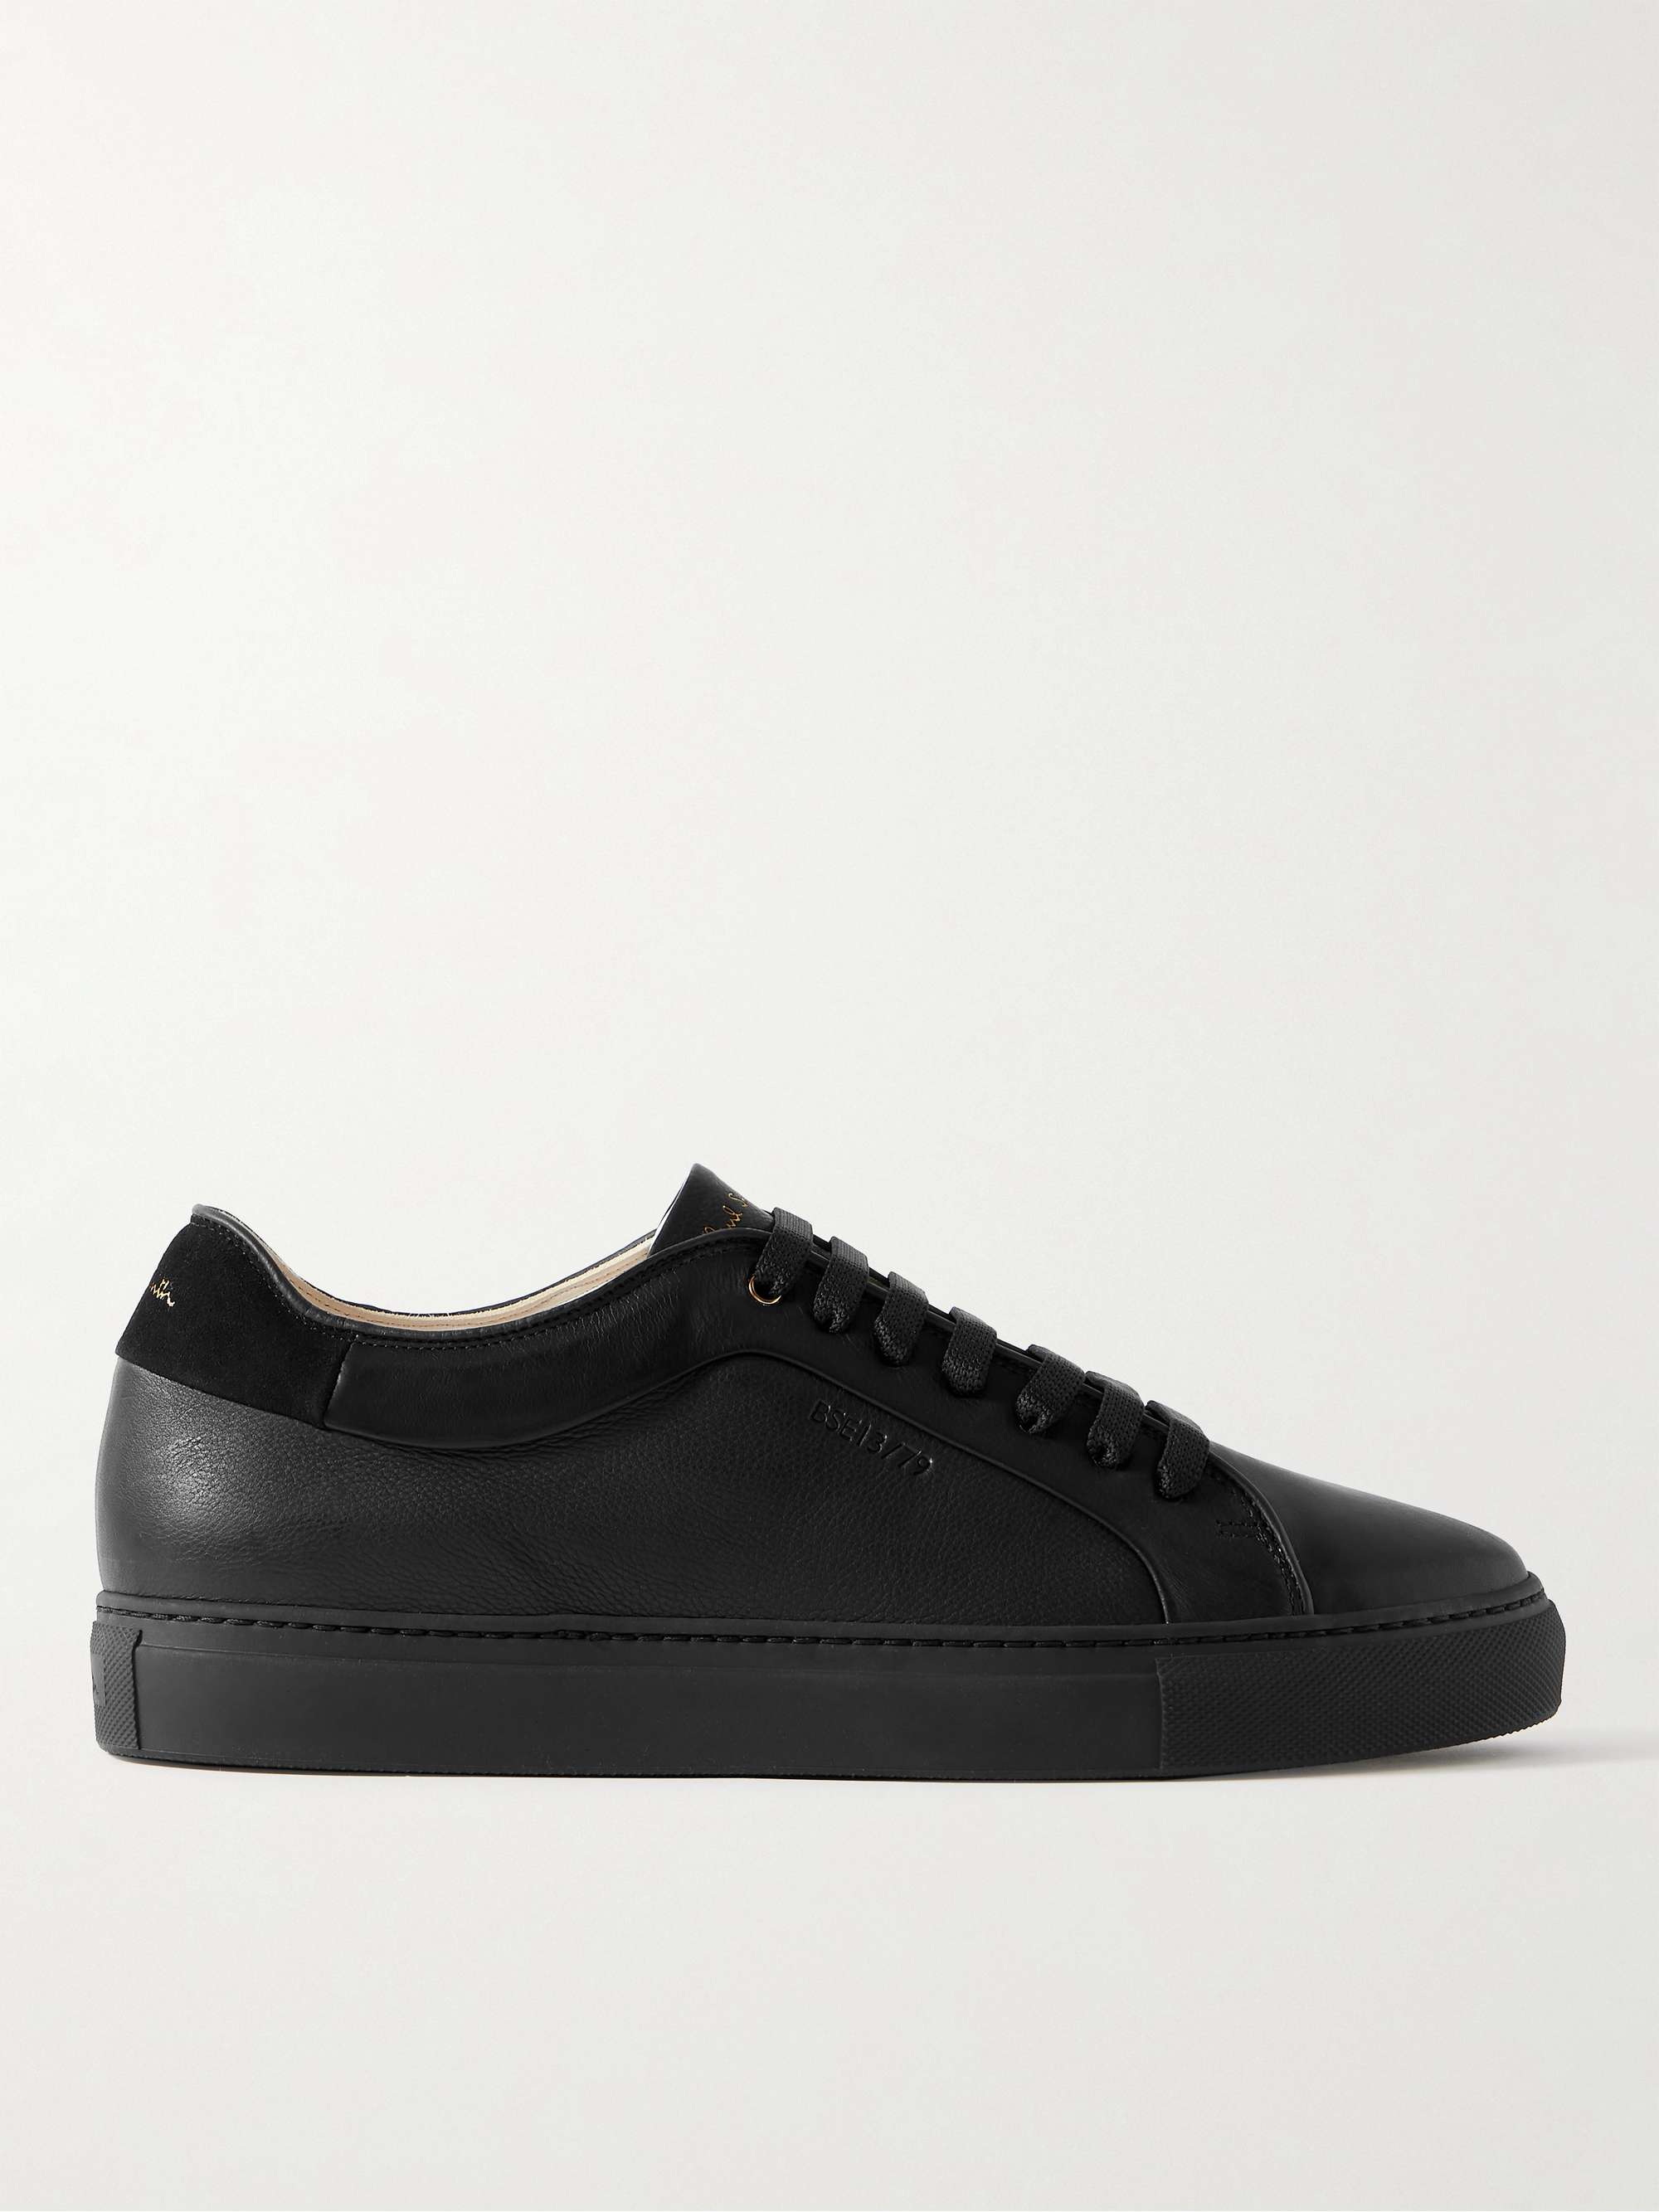 PAUL SMITH Basso Suede-Trimmed ECO Leather Sneakers for Men | MR PORTER